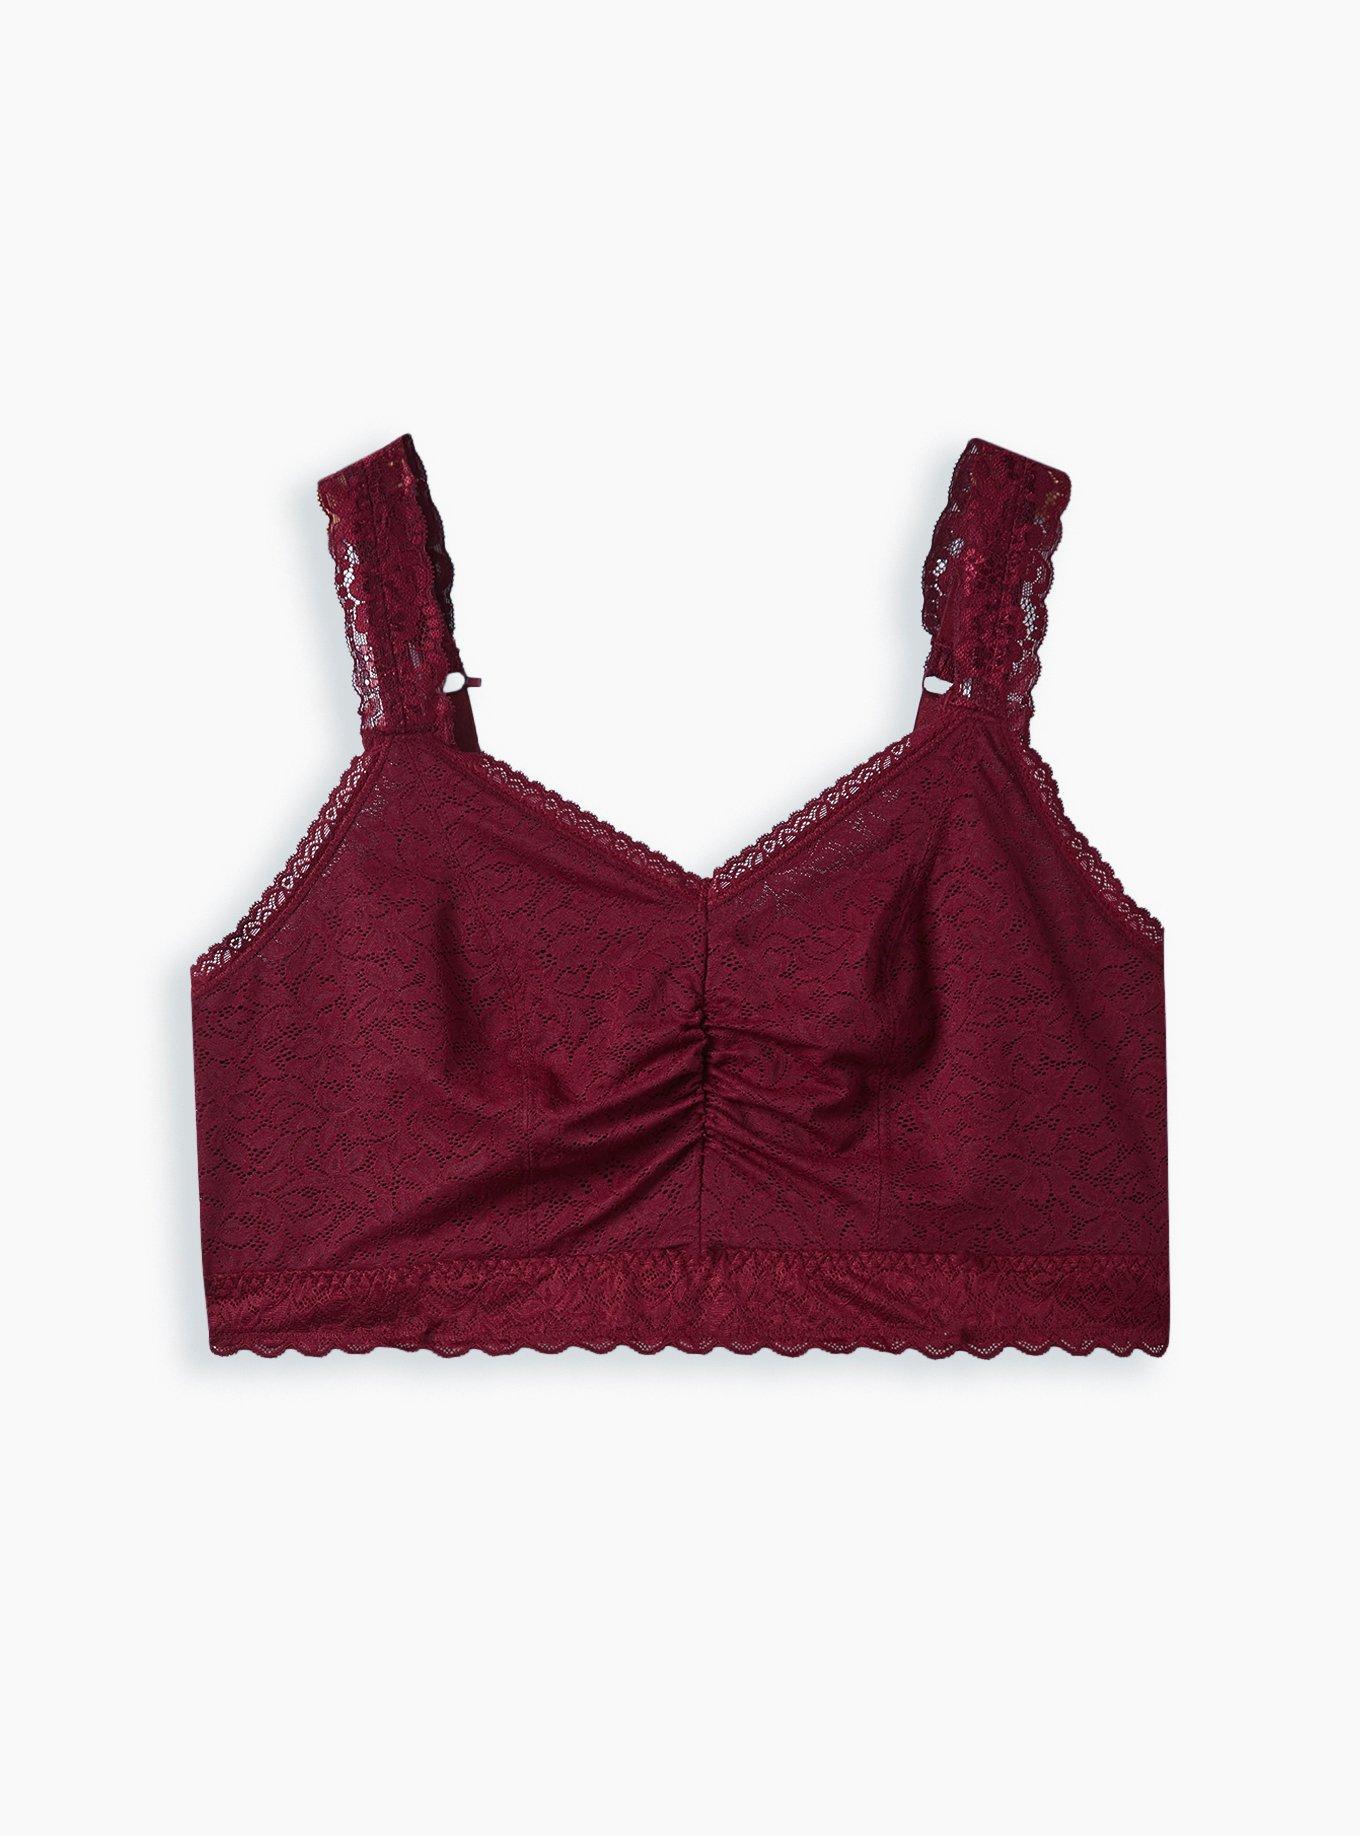 PLUS SIZE LACE MESH LINED STRETCH BRALETTE DK BURGUNDY HOURGLASS BACK 3xl